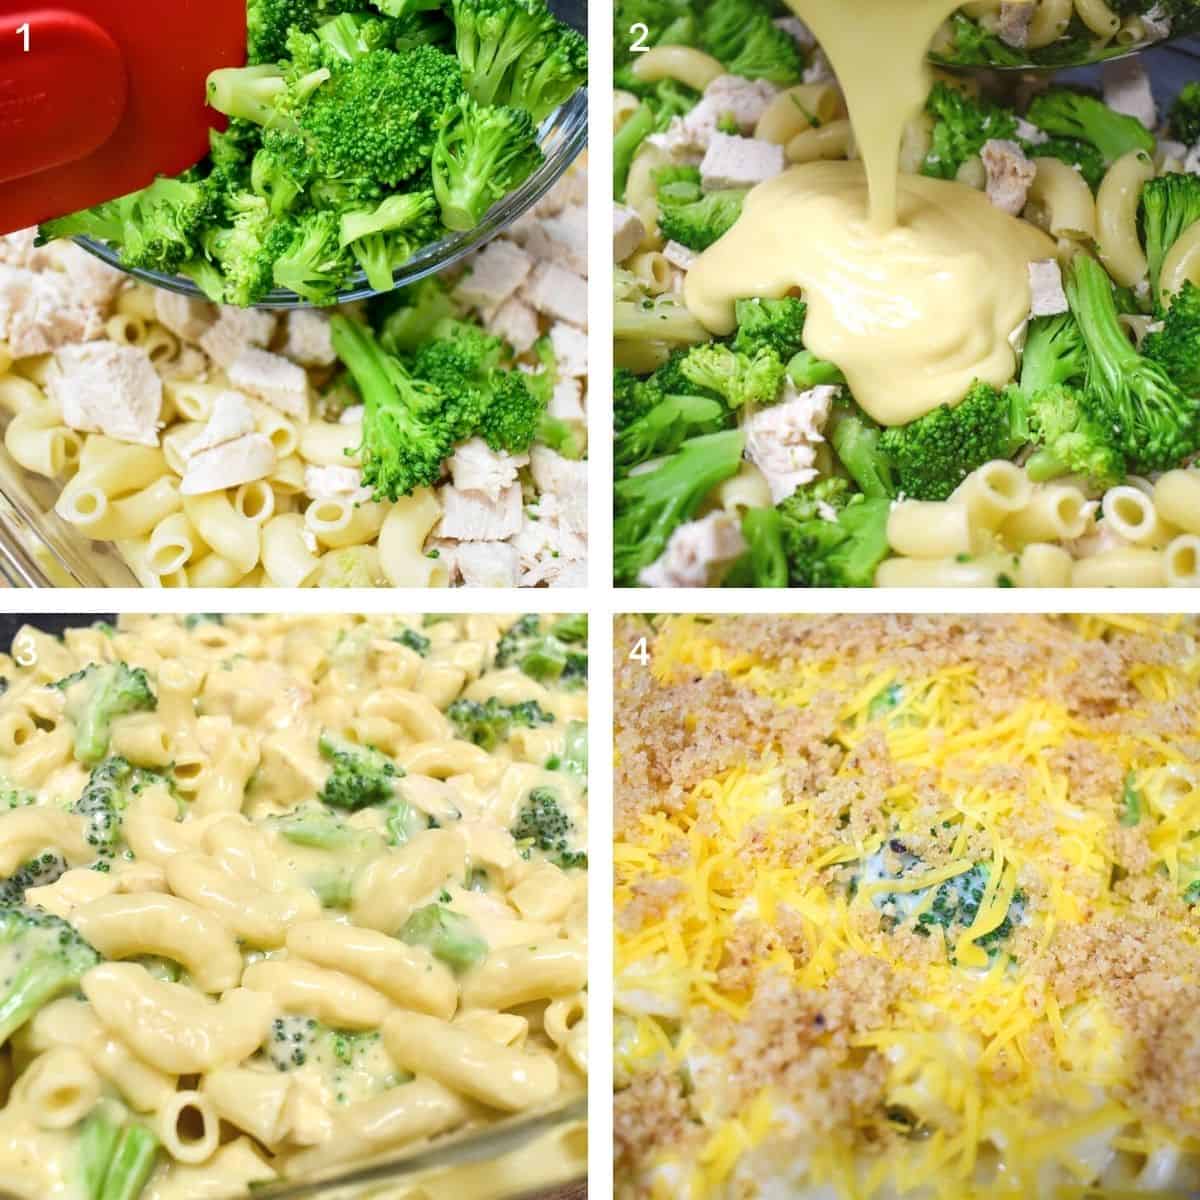 Four images showing the steps to making the chicken and broccoli casserole.